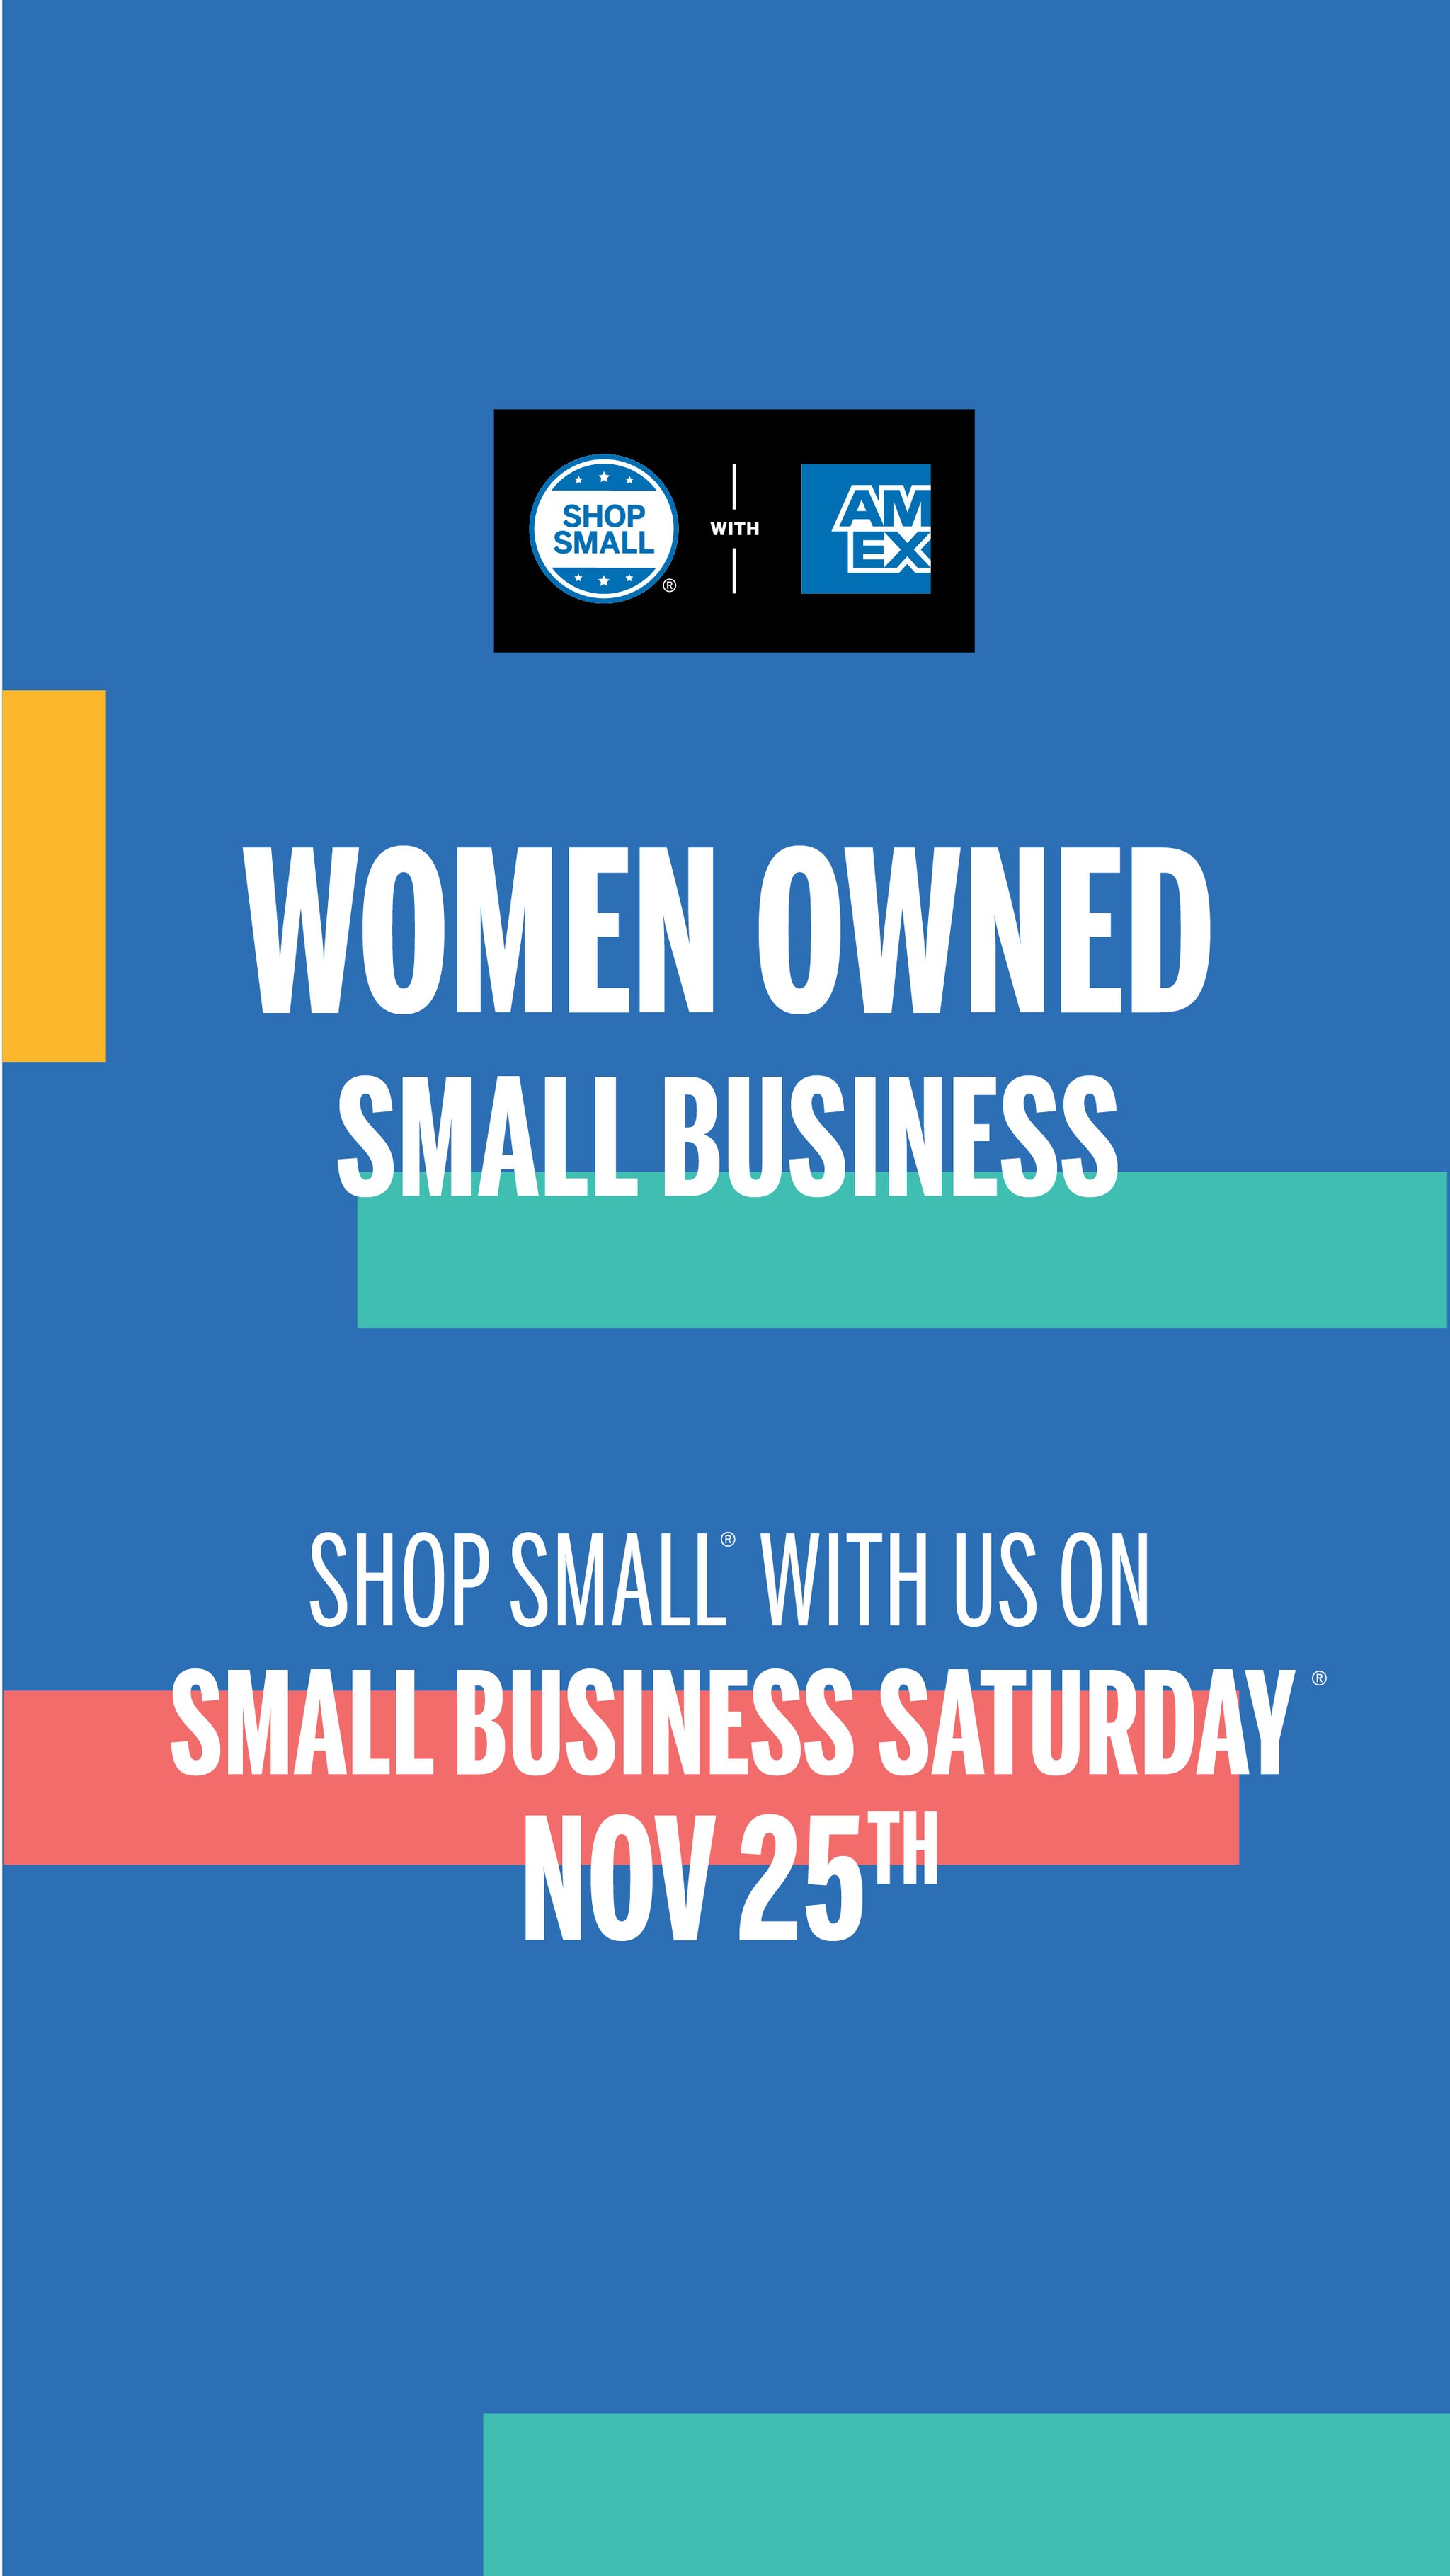 Social Media Story that says Women-Owned Small Business. Shop Small with us on Small Business Saturday Nov 25th.